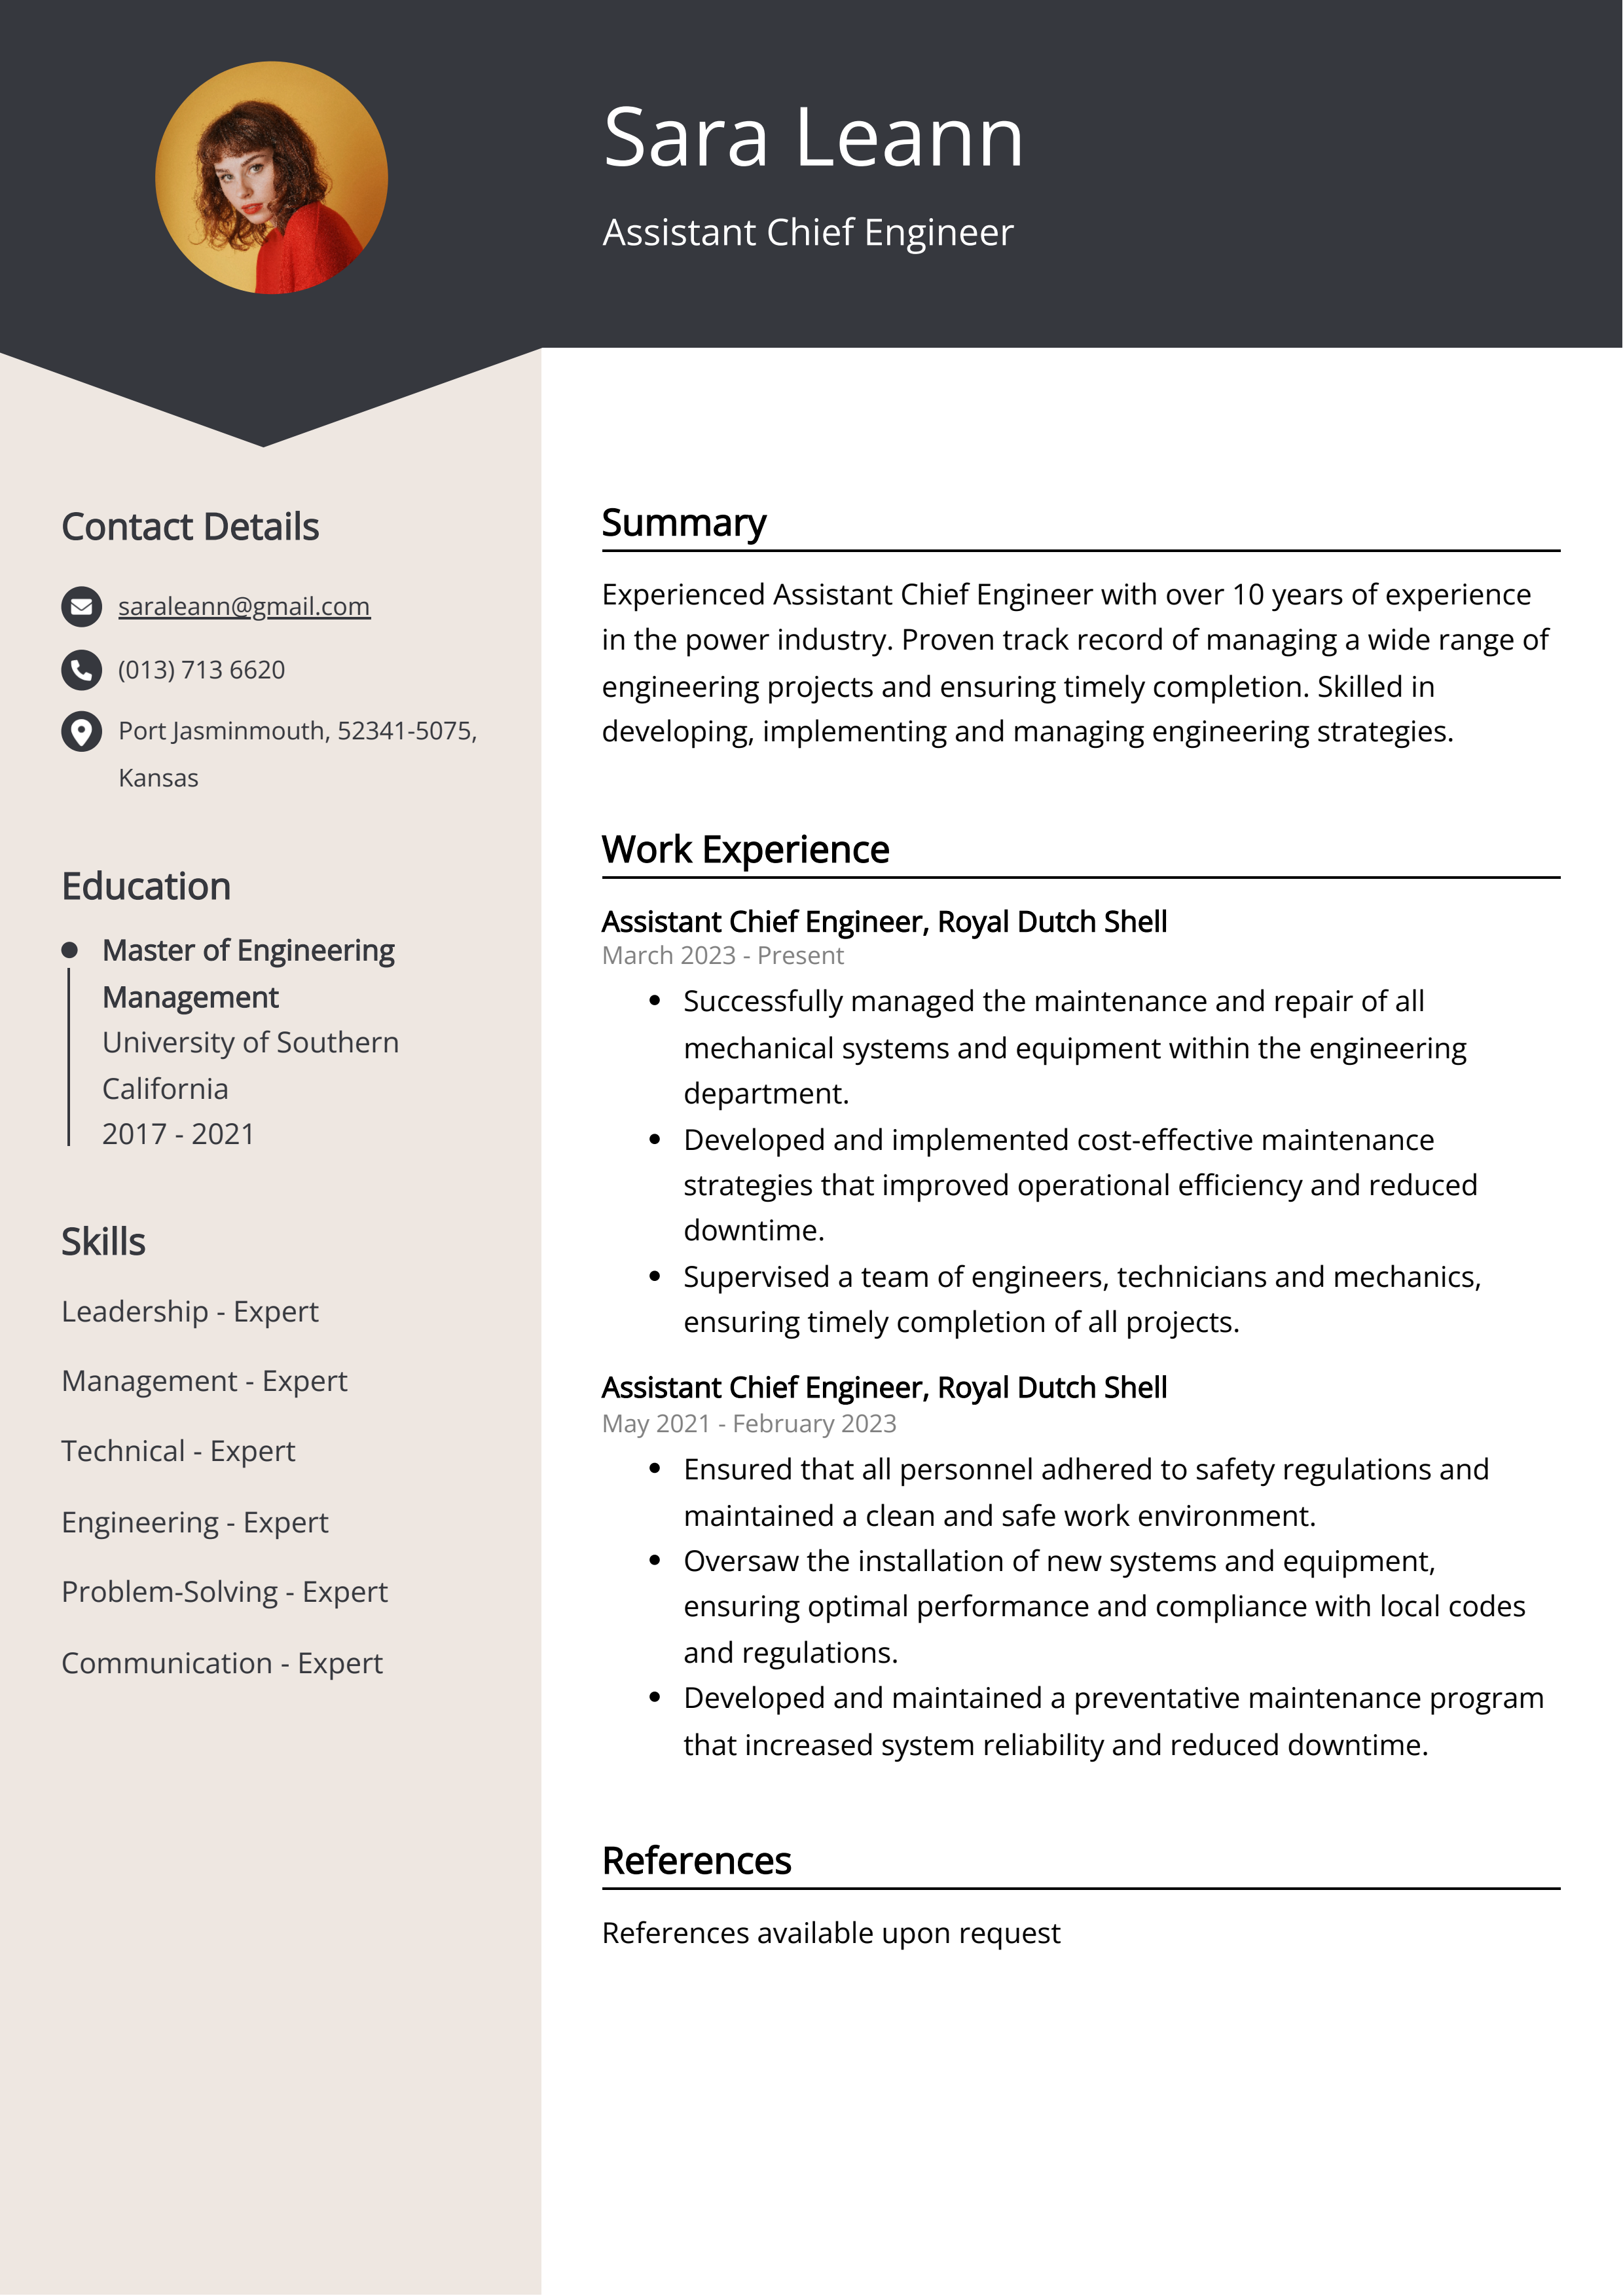 Assistant Chief Engineer CV Example